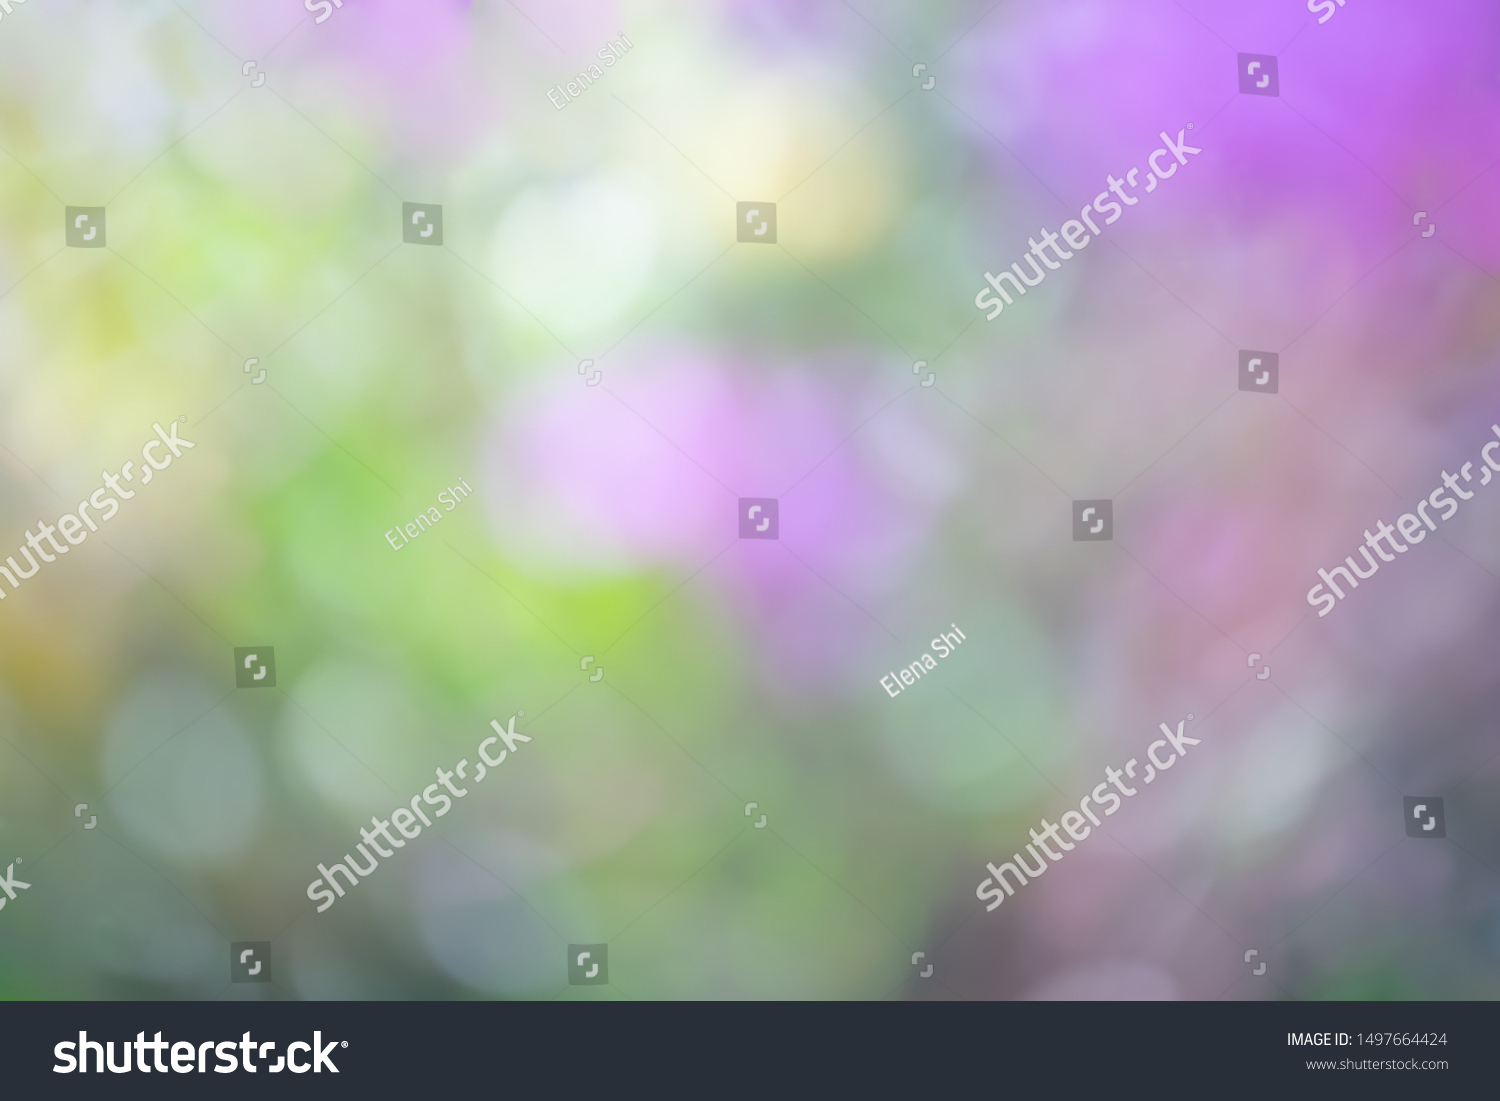 Defocused abstract background in violet-yellow tones. The atmosphere of spring and celebration. #1497664424